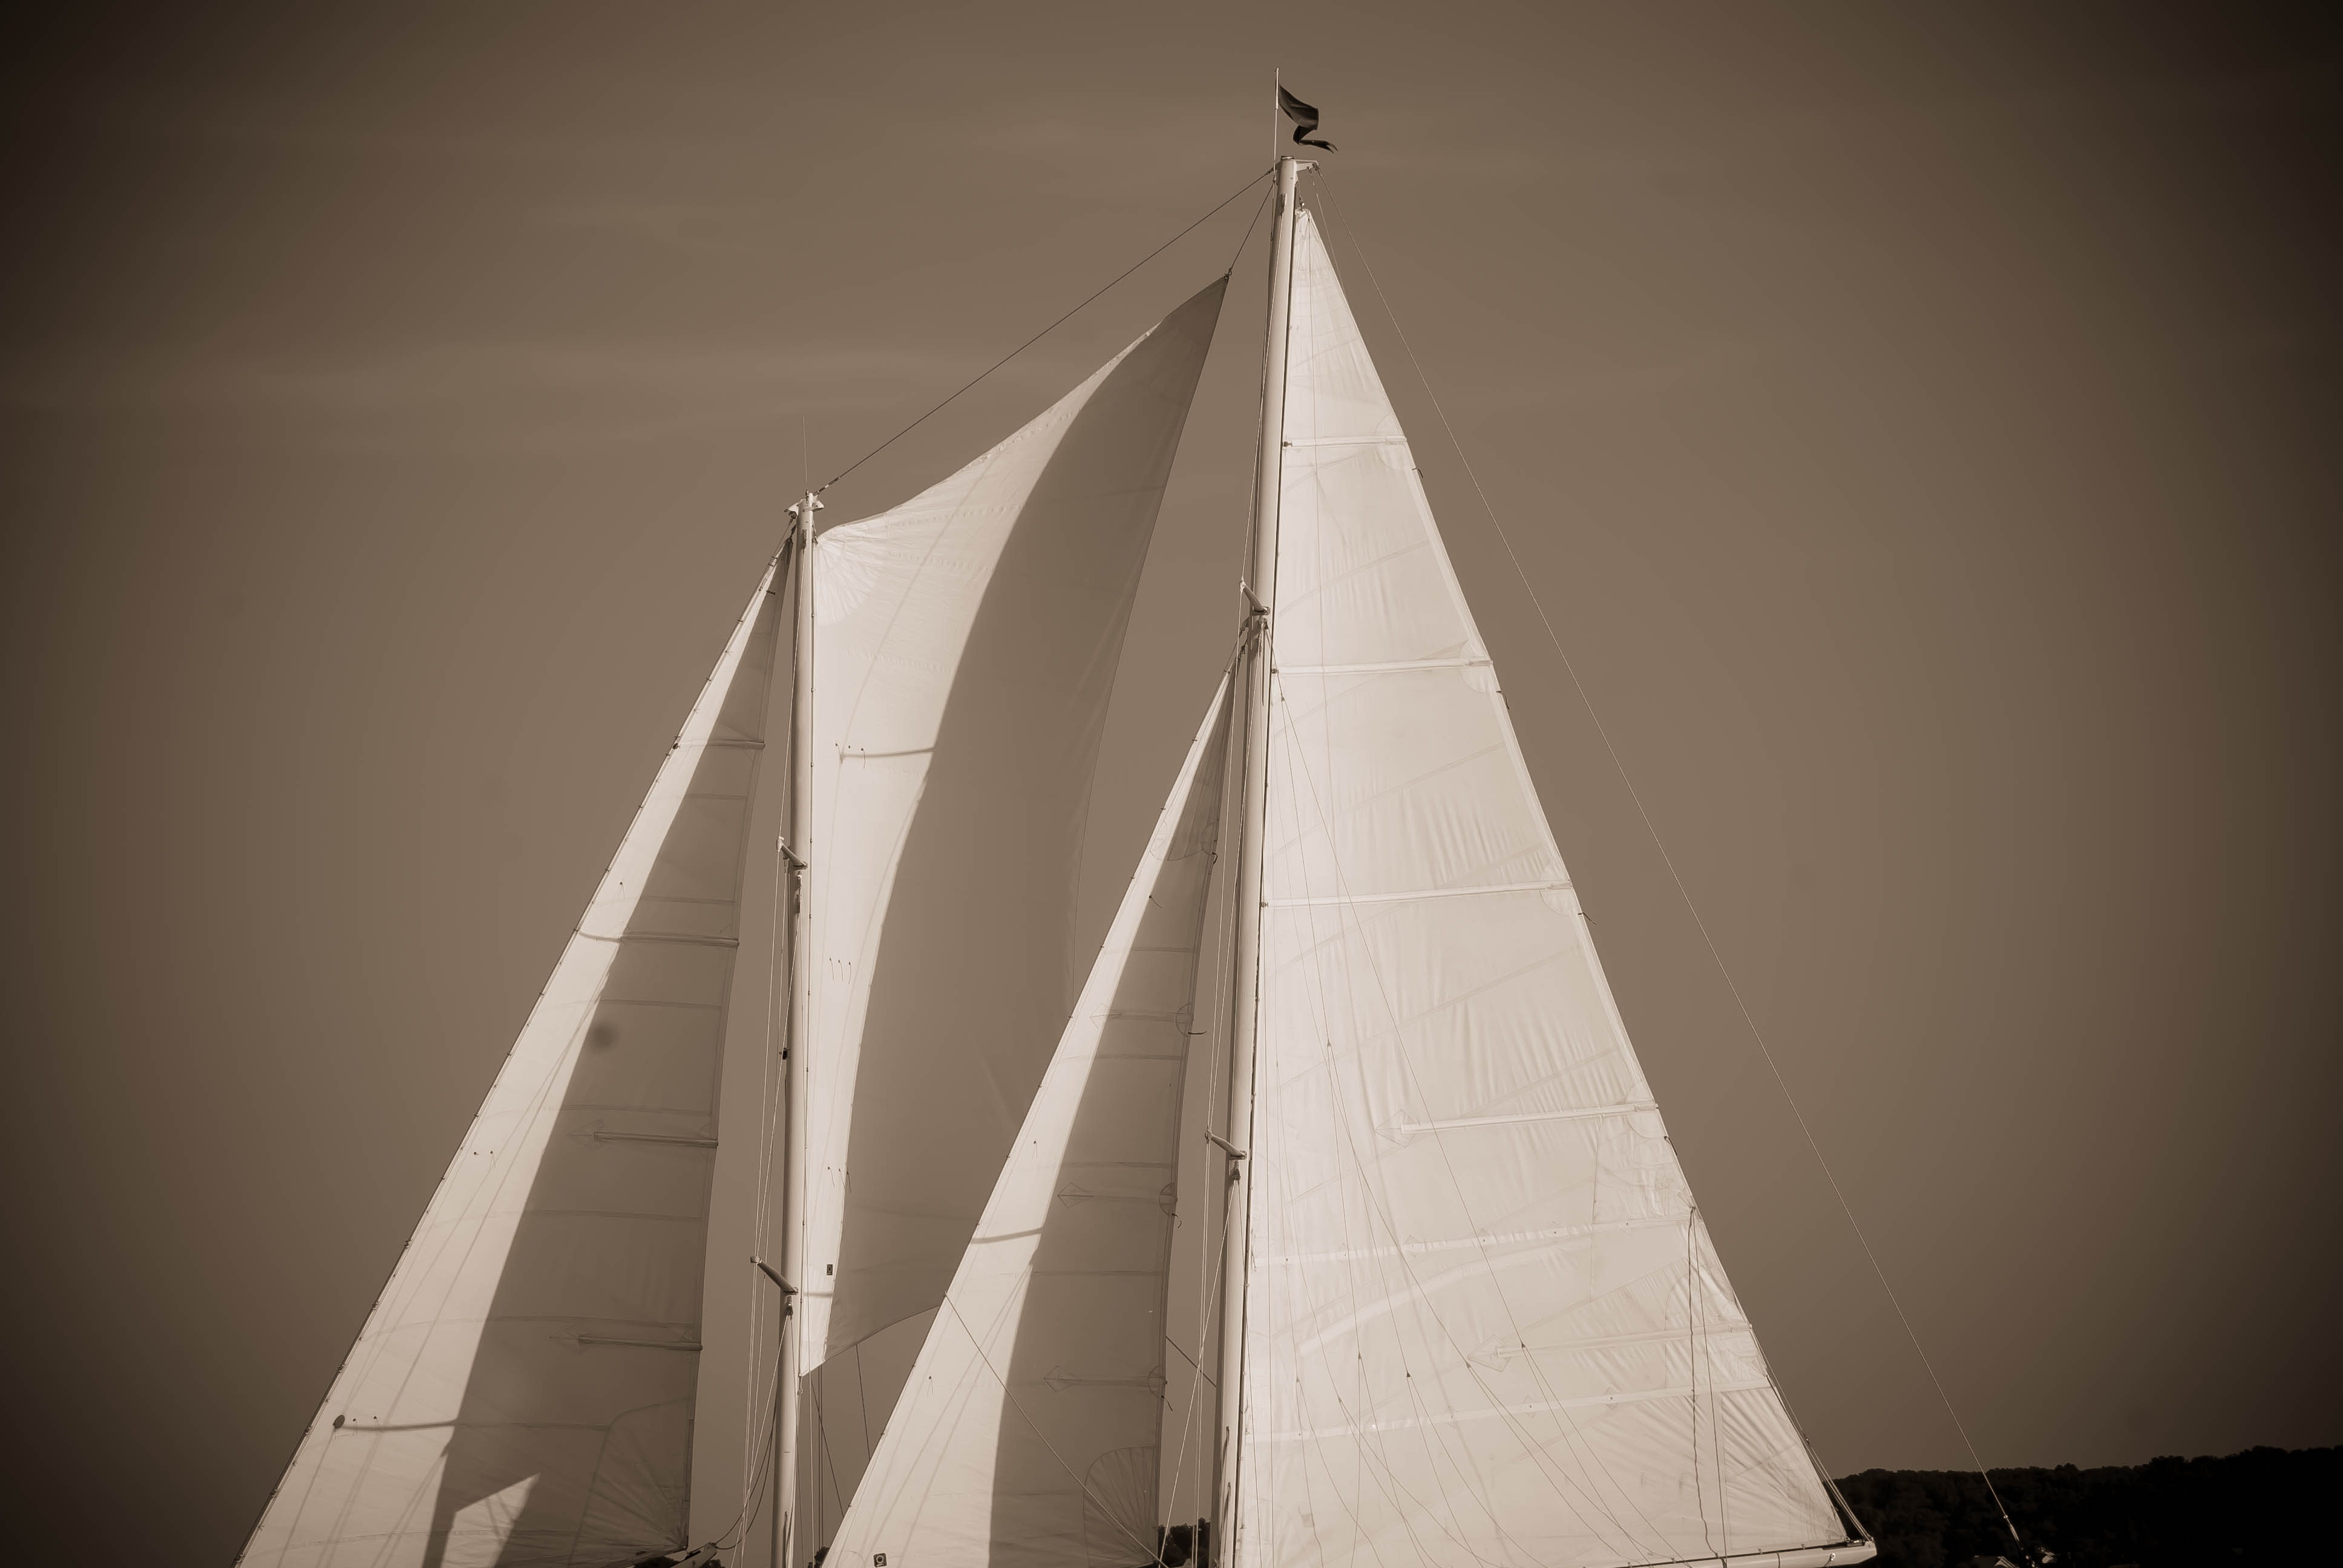 Black and white sails and sky